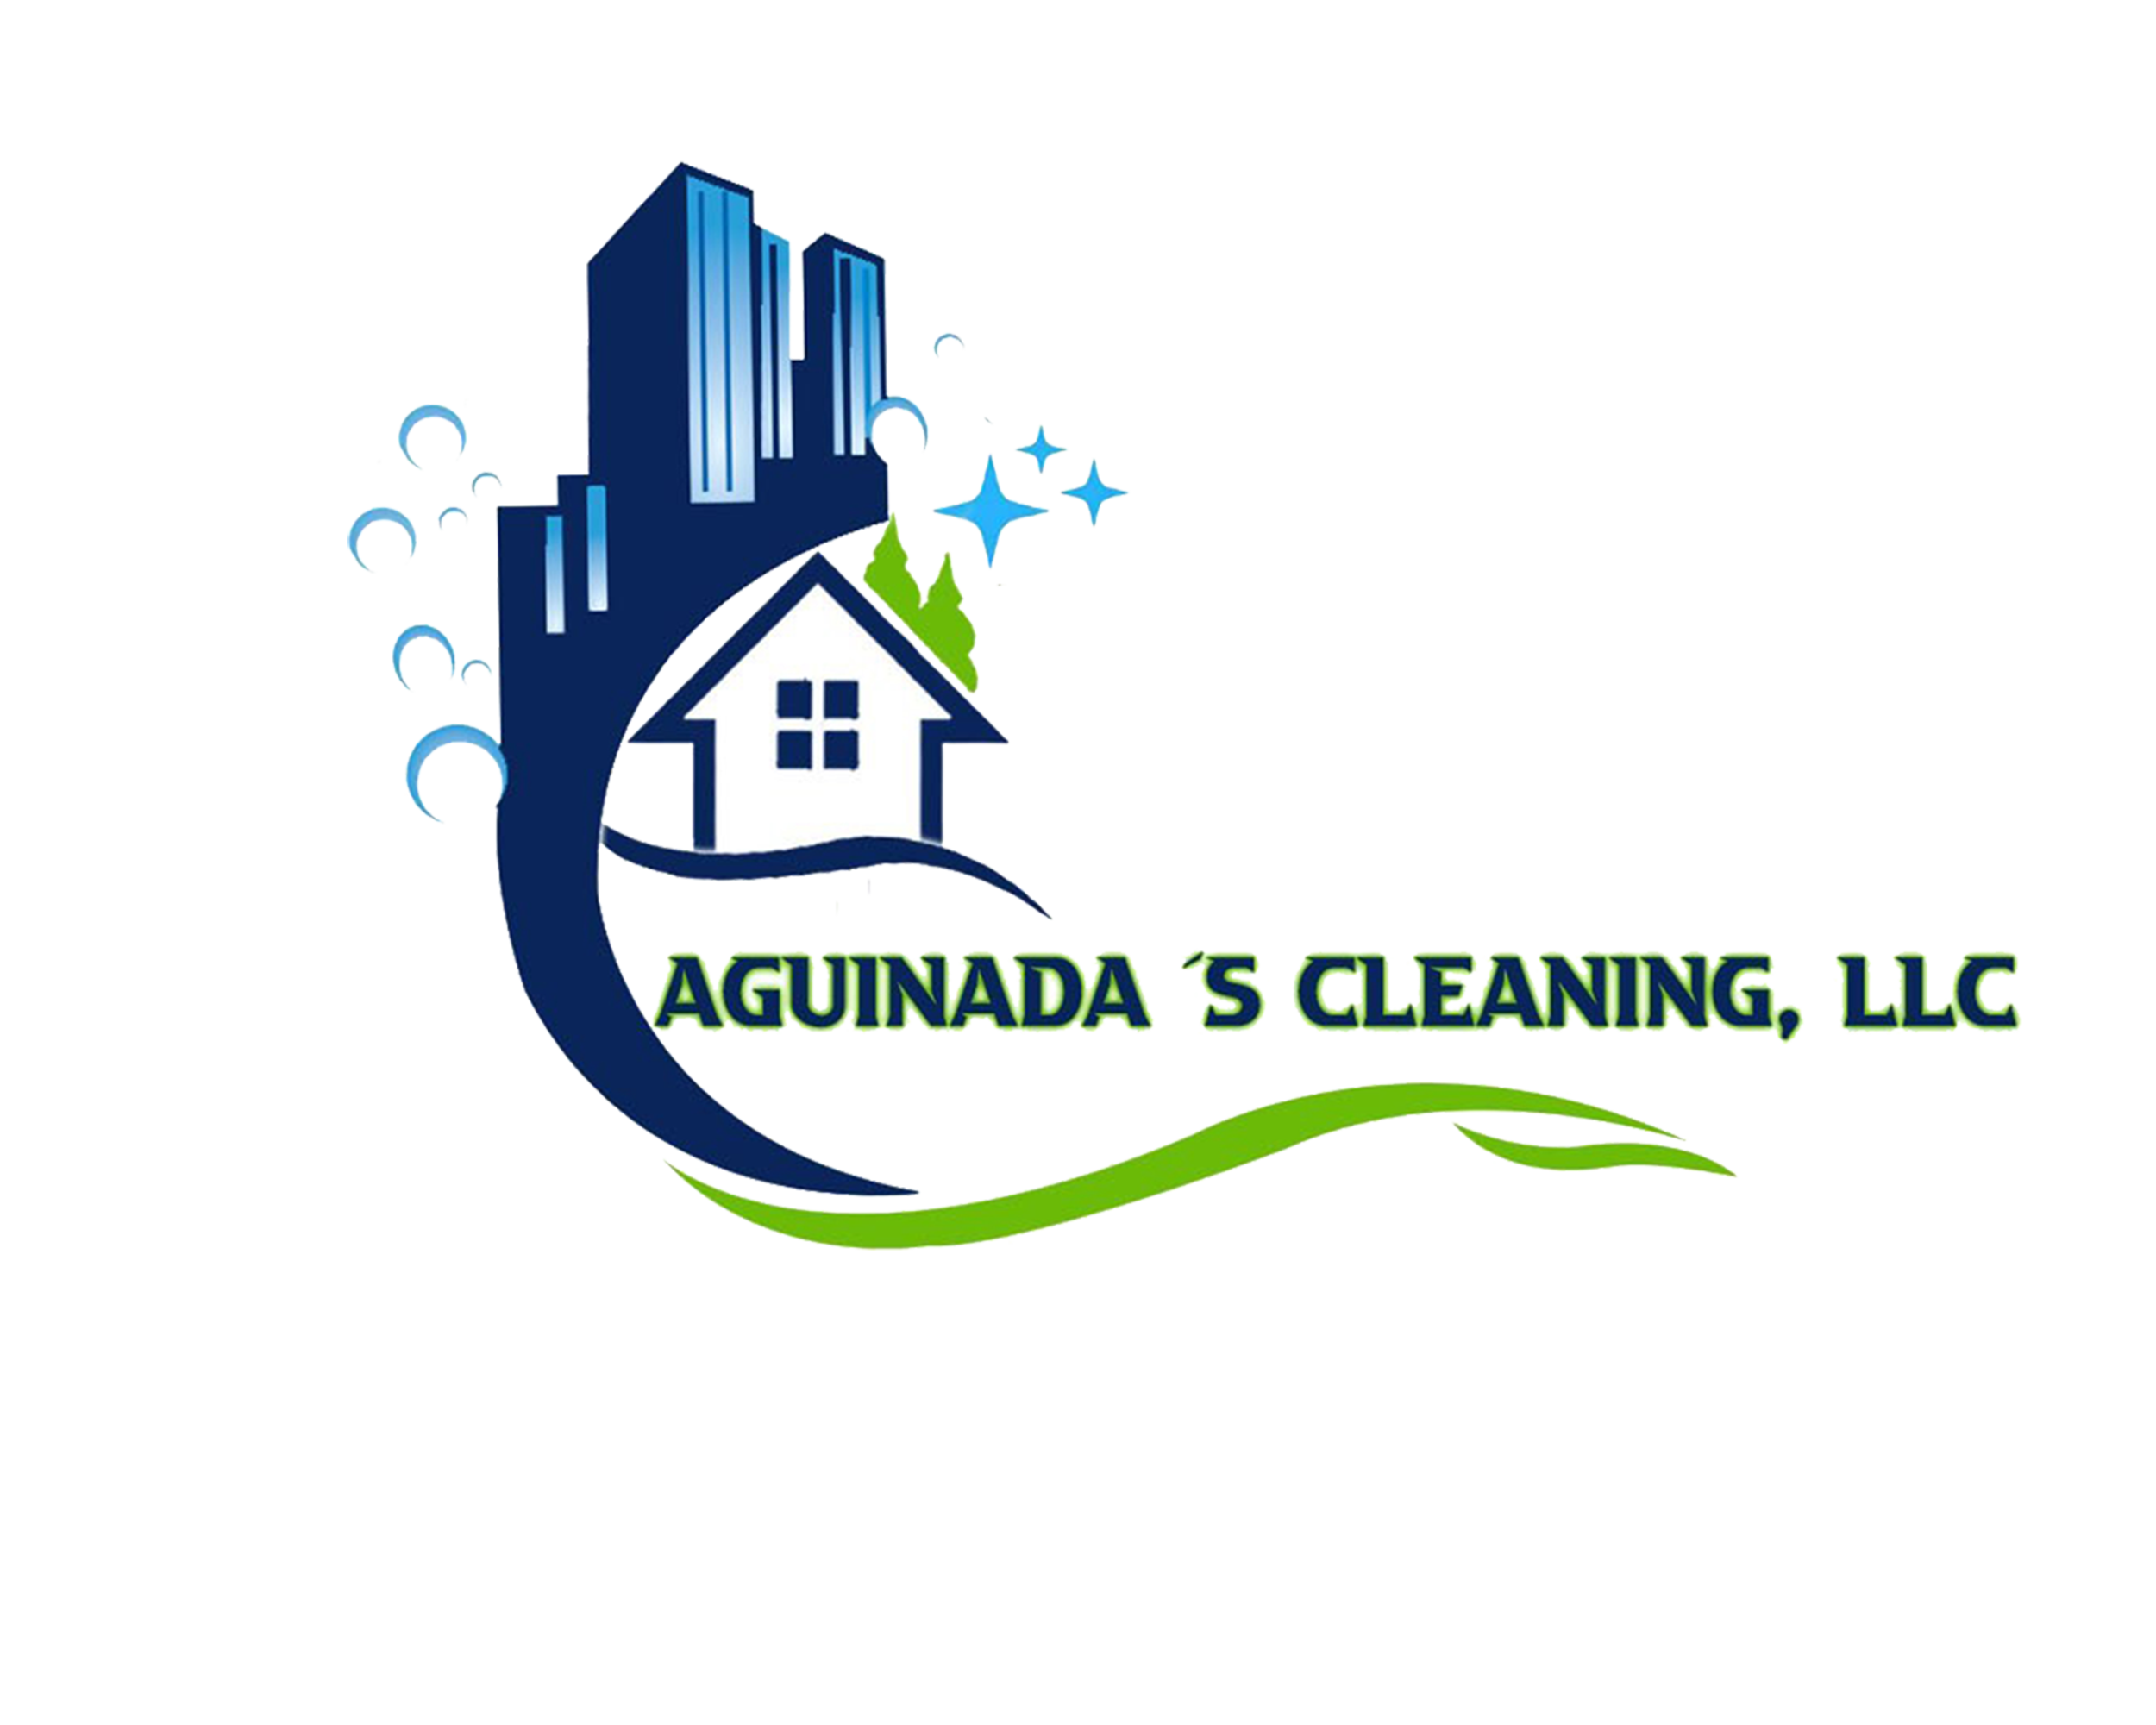 Aguinada's Cleaning Services